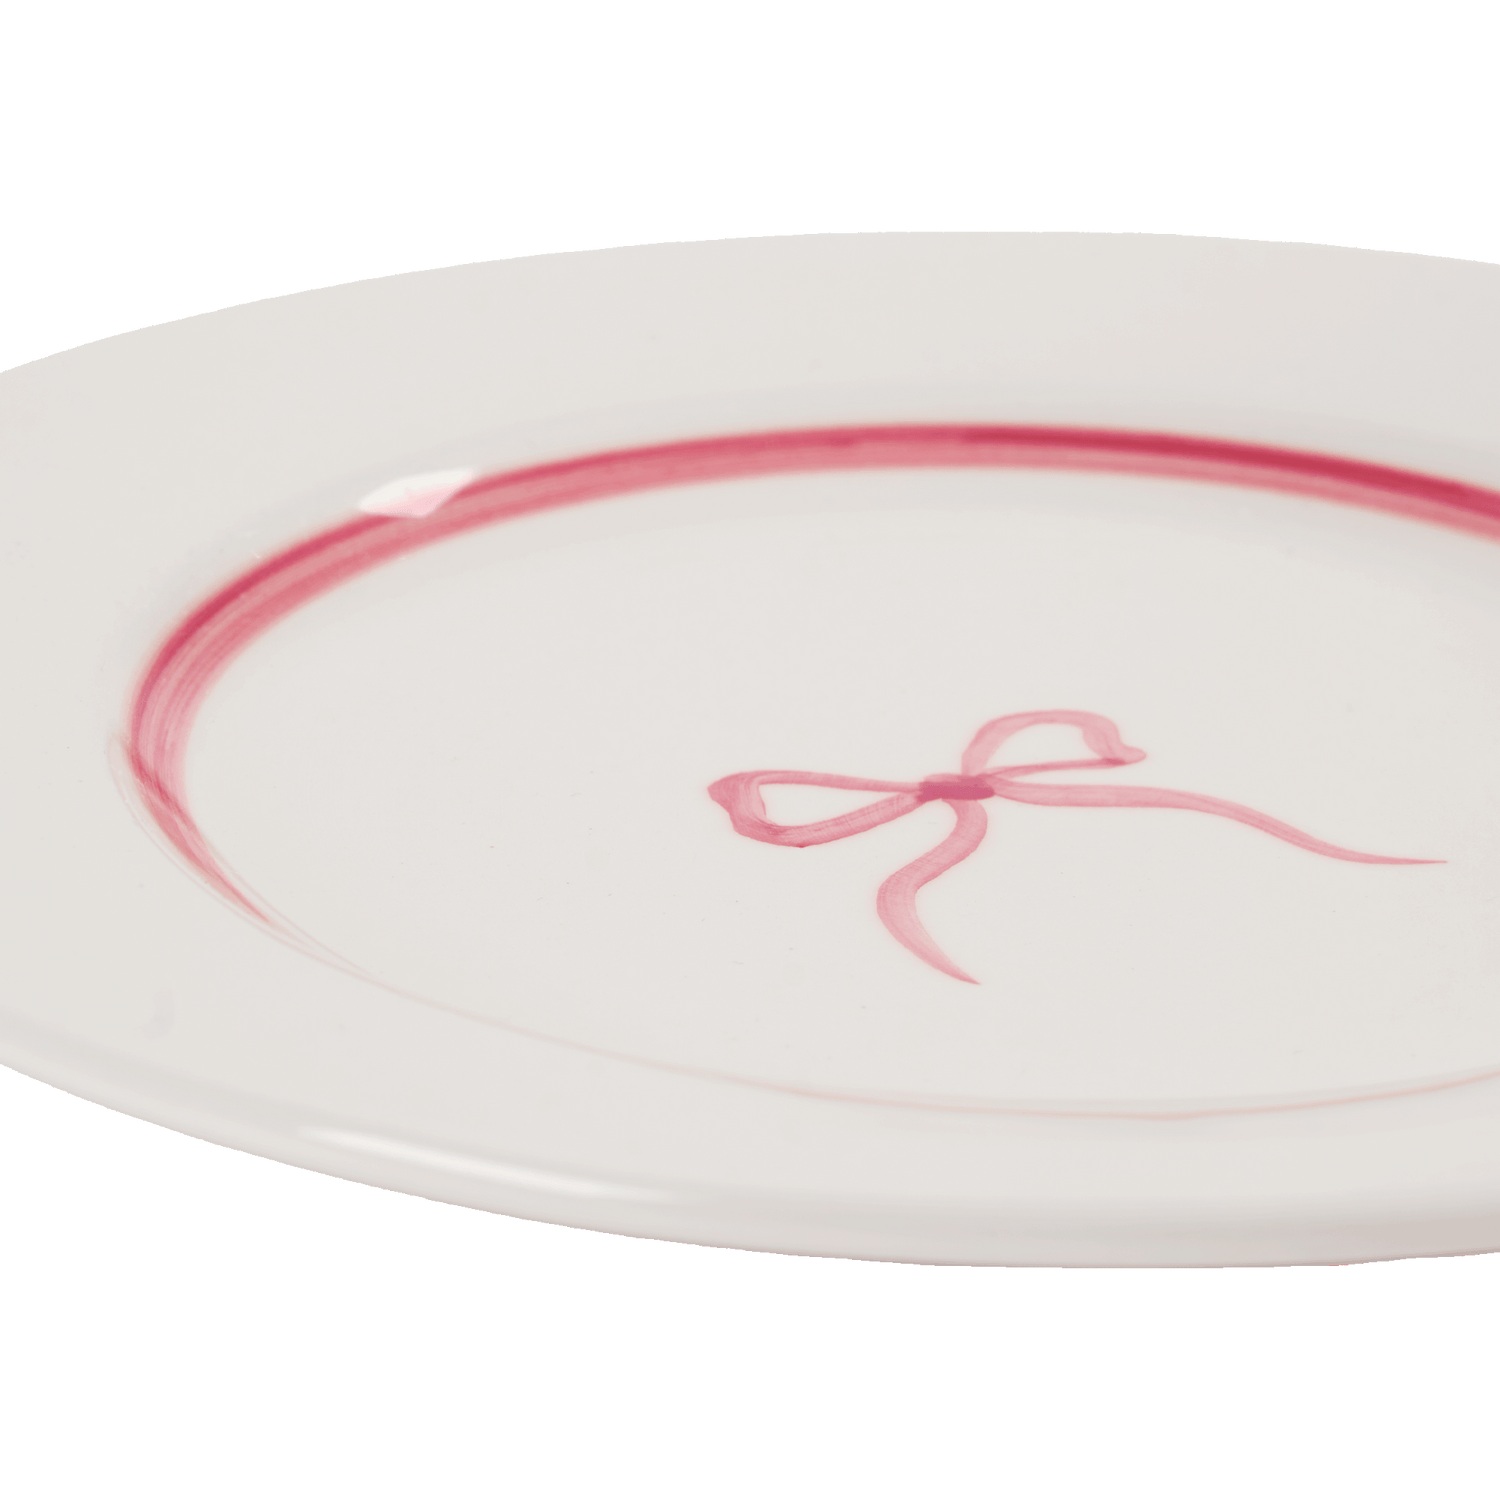 Bow salad plate - Pink 22 cm